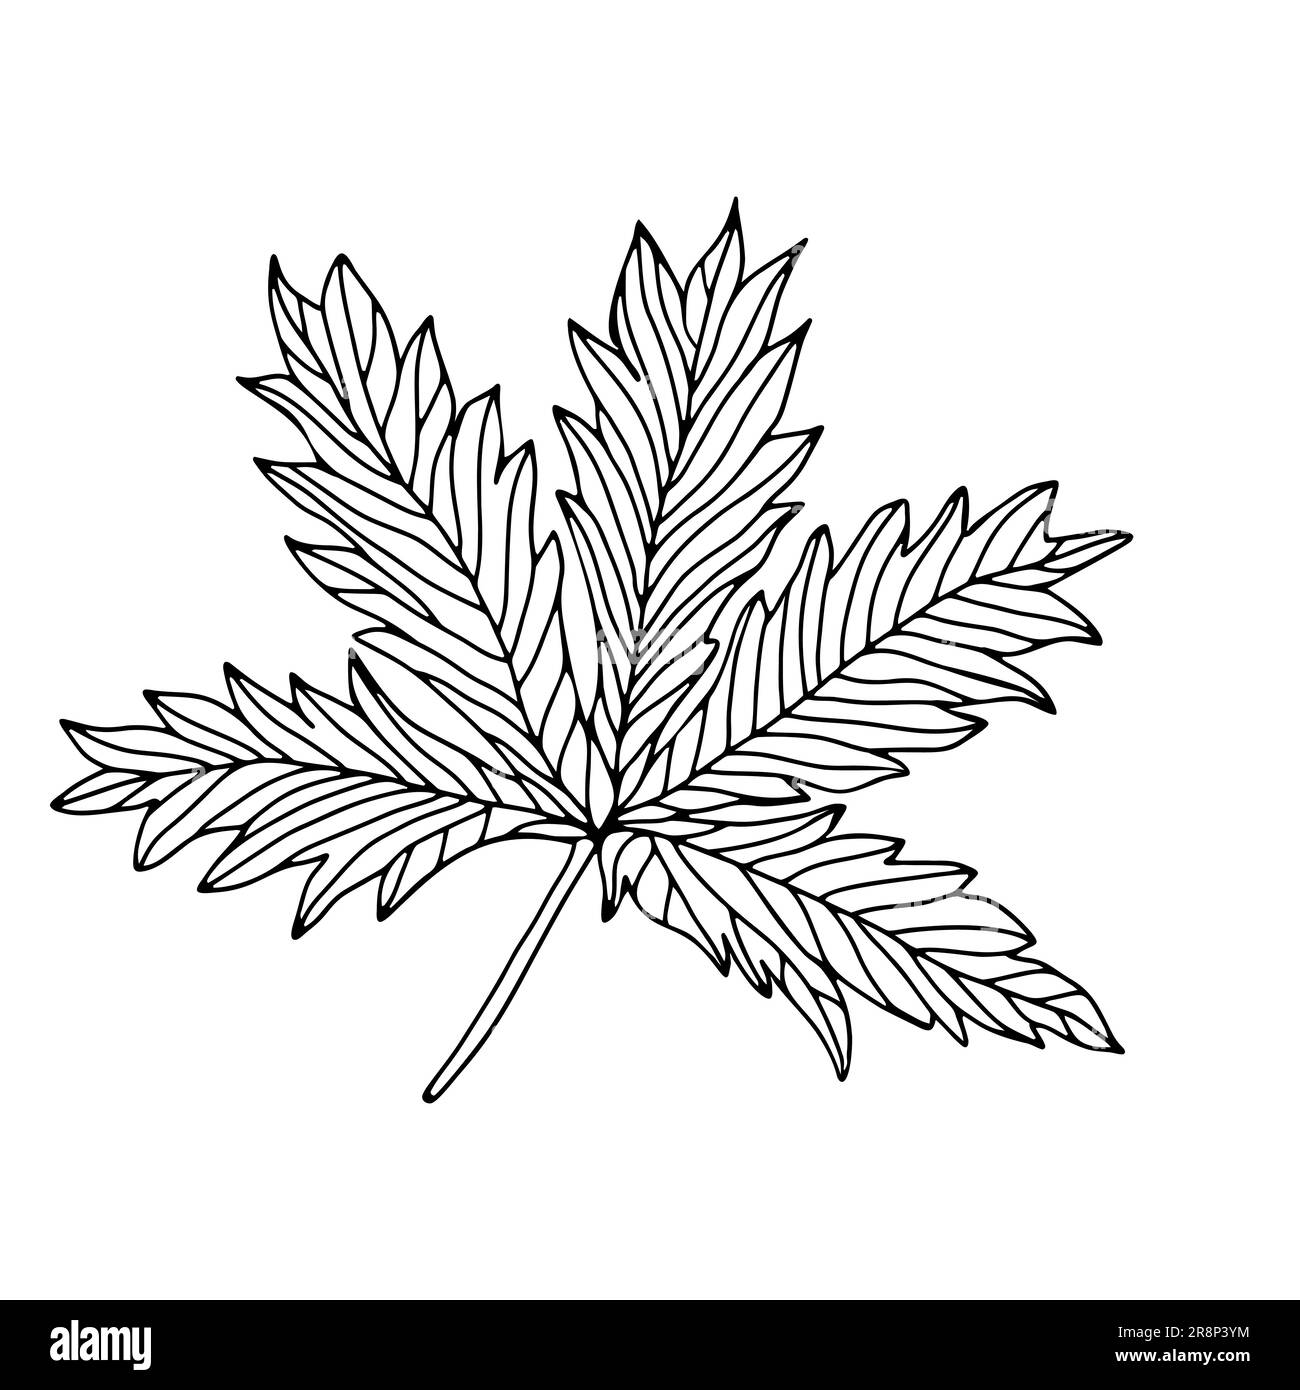 Hand drawn leaves, floral elements isolate on white background.Plants element illustrated Design for decor and print. Stock Vector